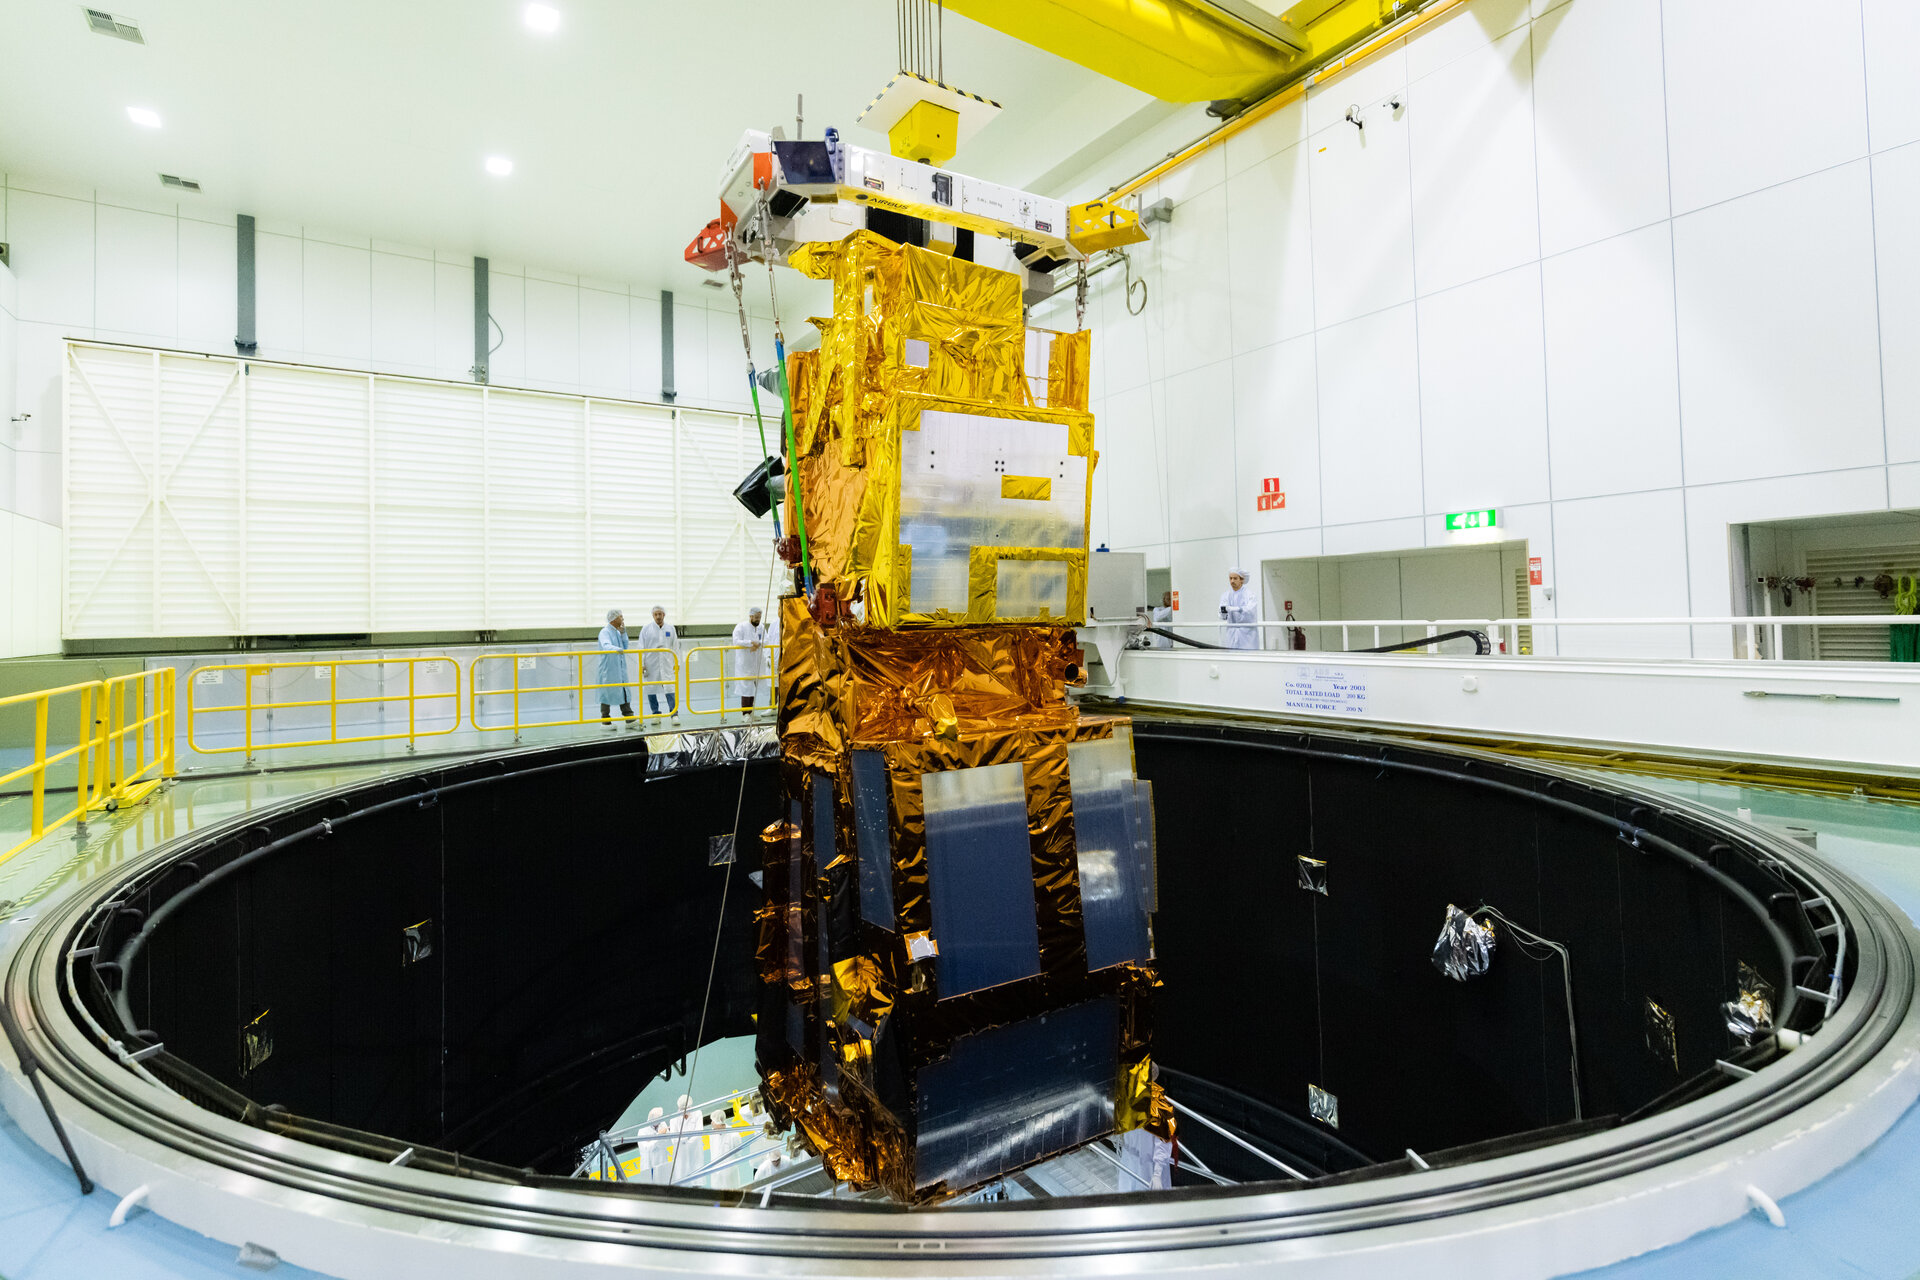 MetOp-SG lowered into LSS